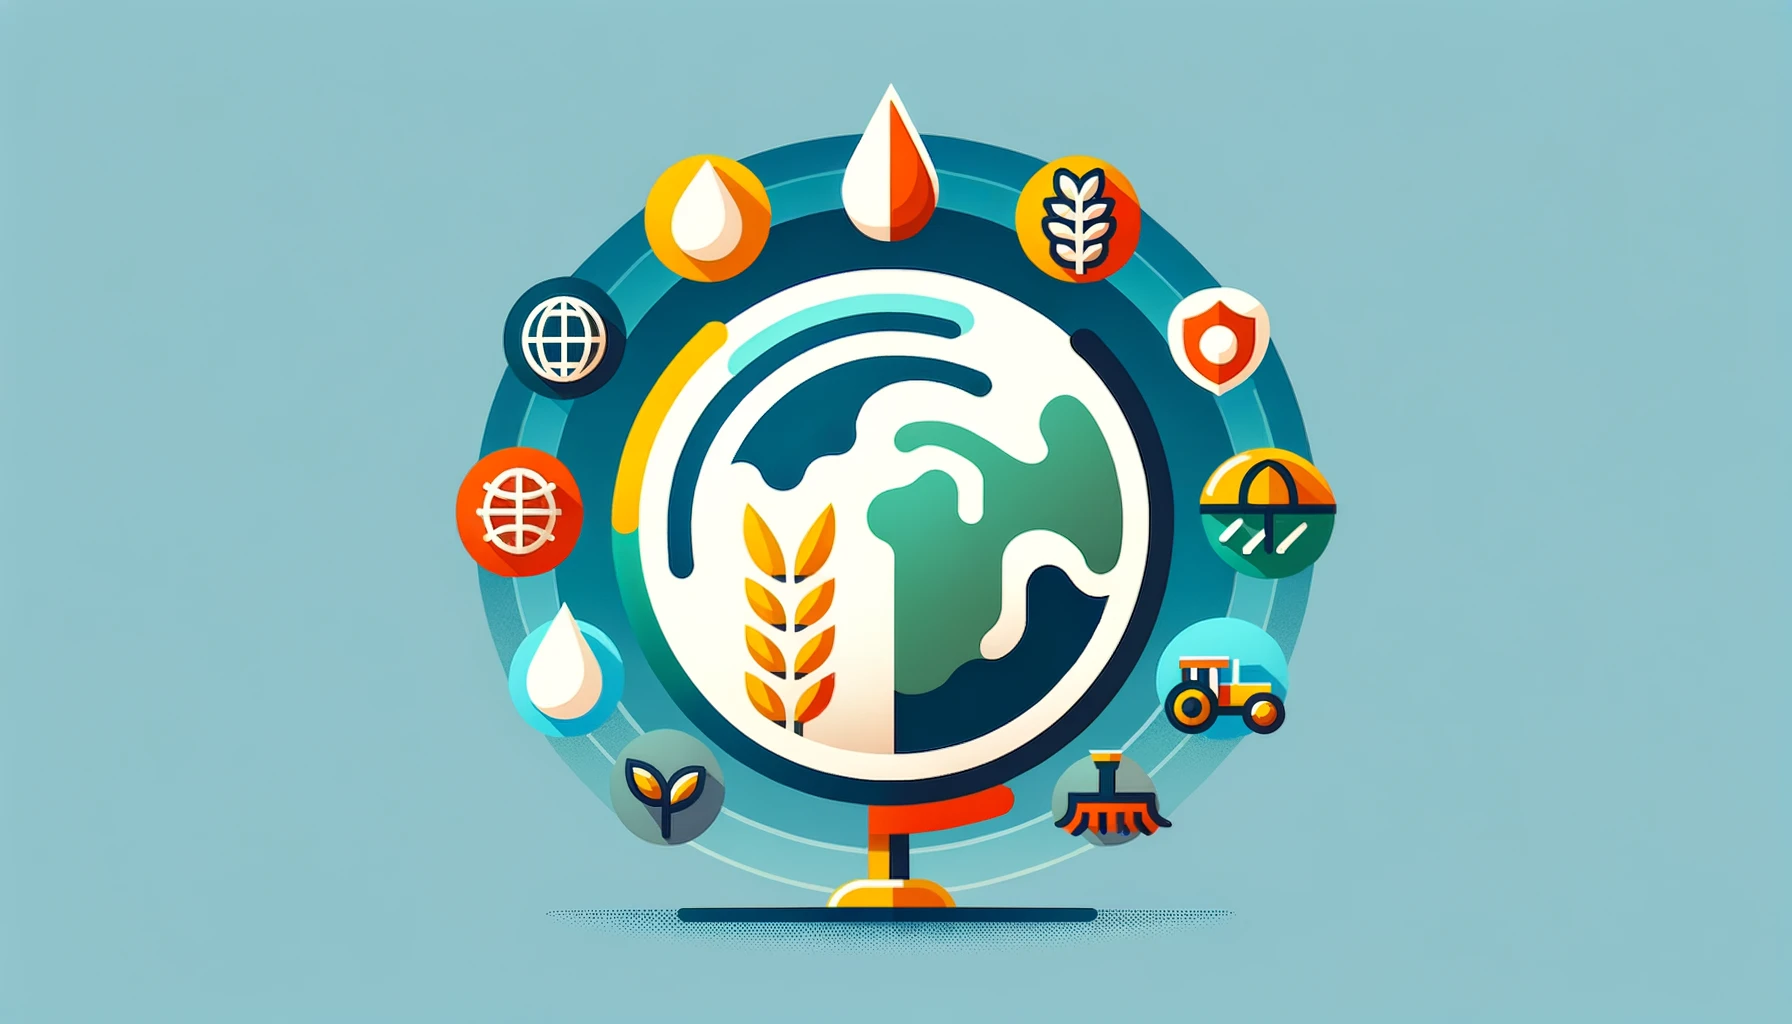 Pula secures $20M Series B to offer agricultural insurance in Africa, Asia, and Latin America